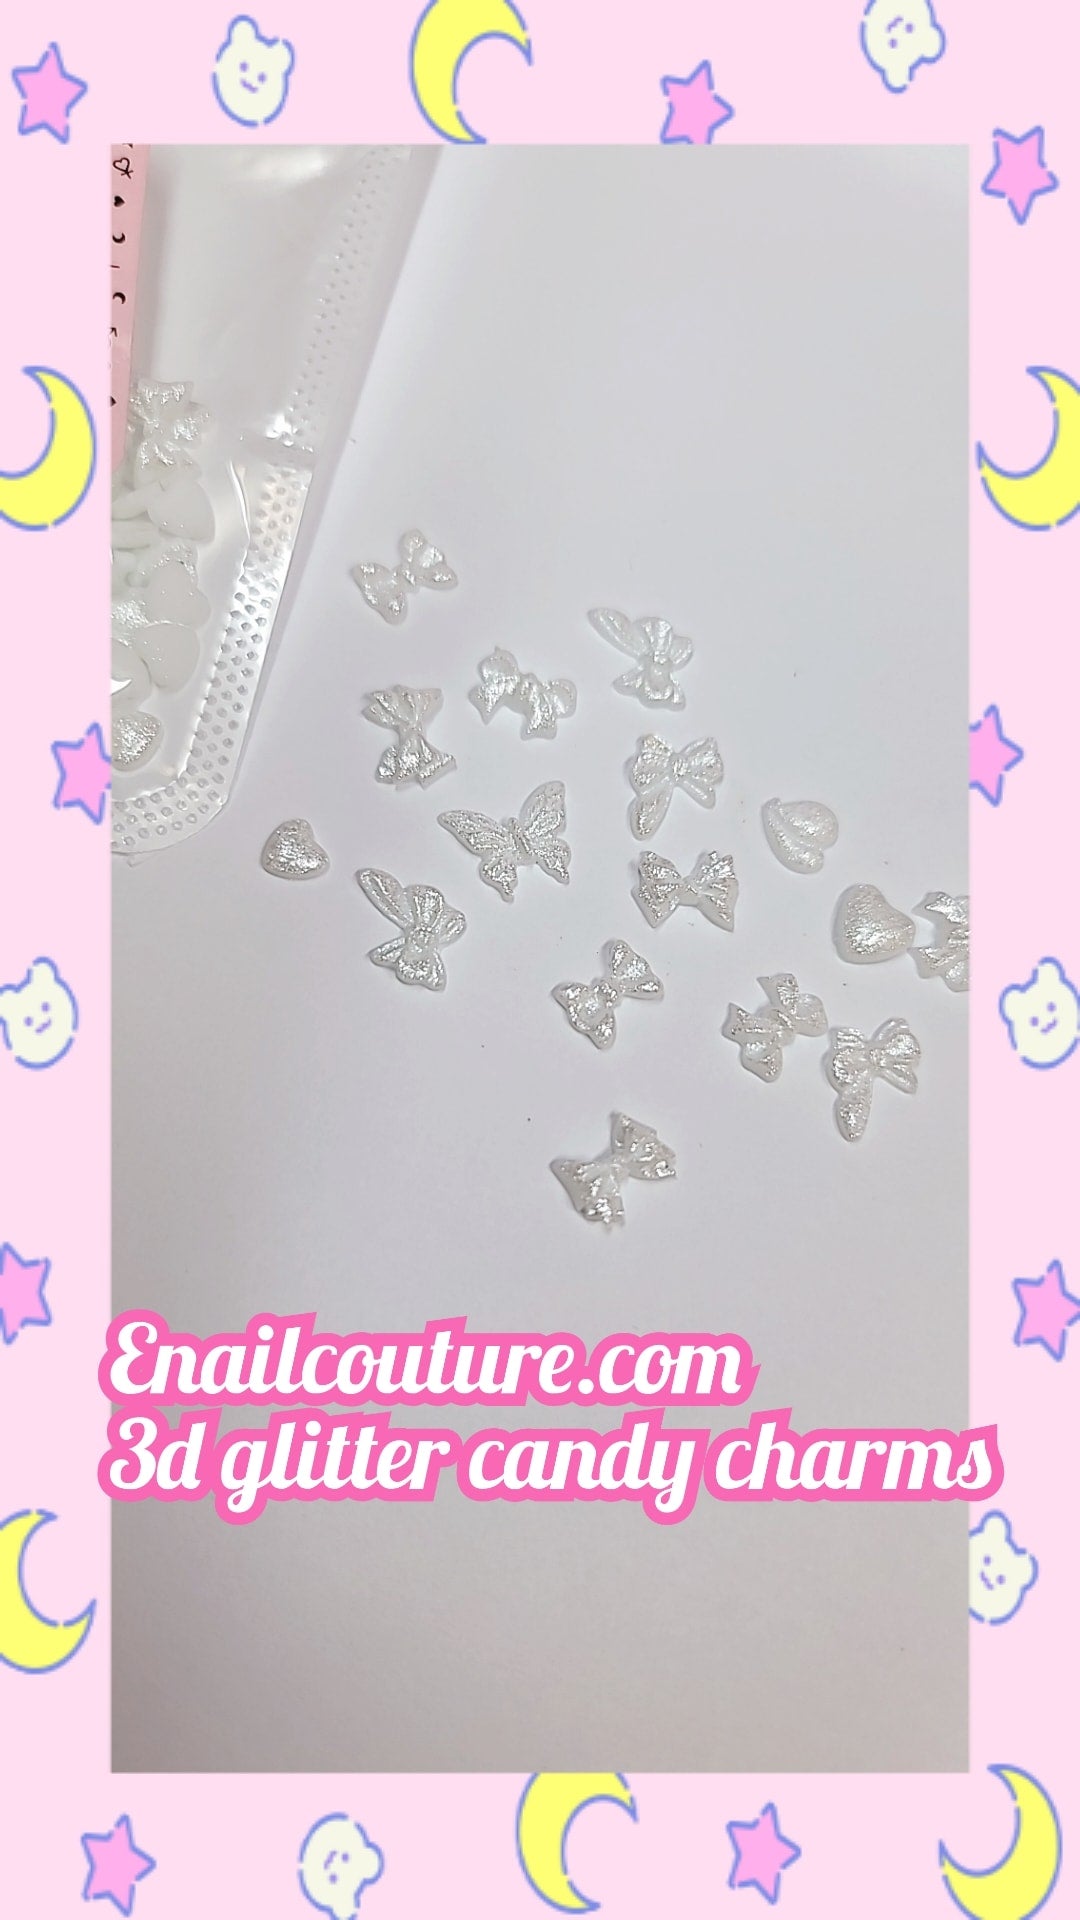 3d Glitter candy charms( 3D Rose Flower Butterfly Nail Charms Acrylic Pink Purple White 3D Butterfly Rose Flower Nail Art Charms Mix Pearl Glitter Round Beads for Nail Art Designs Accessories DIY Craft)